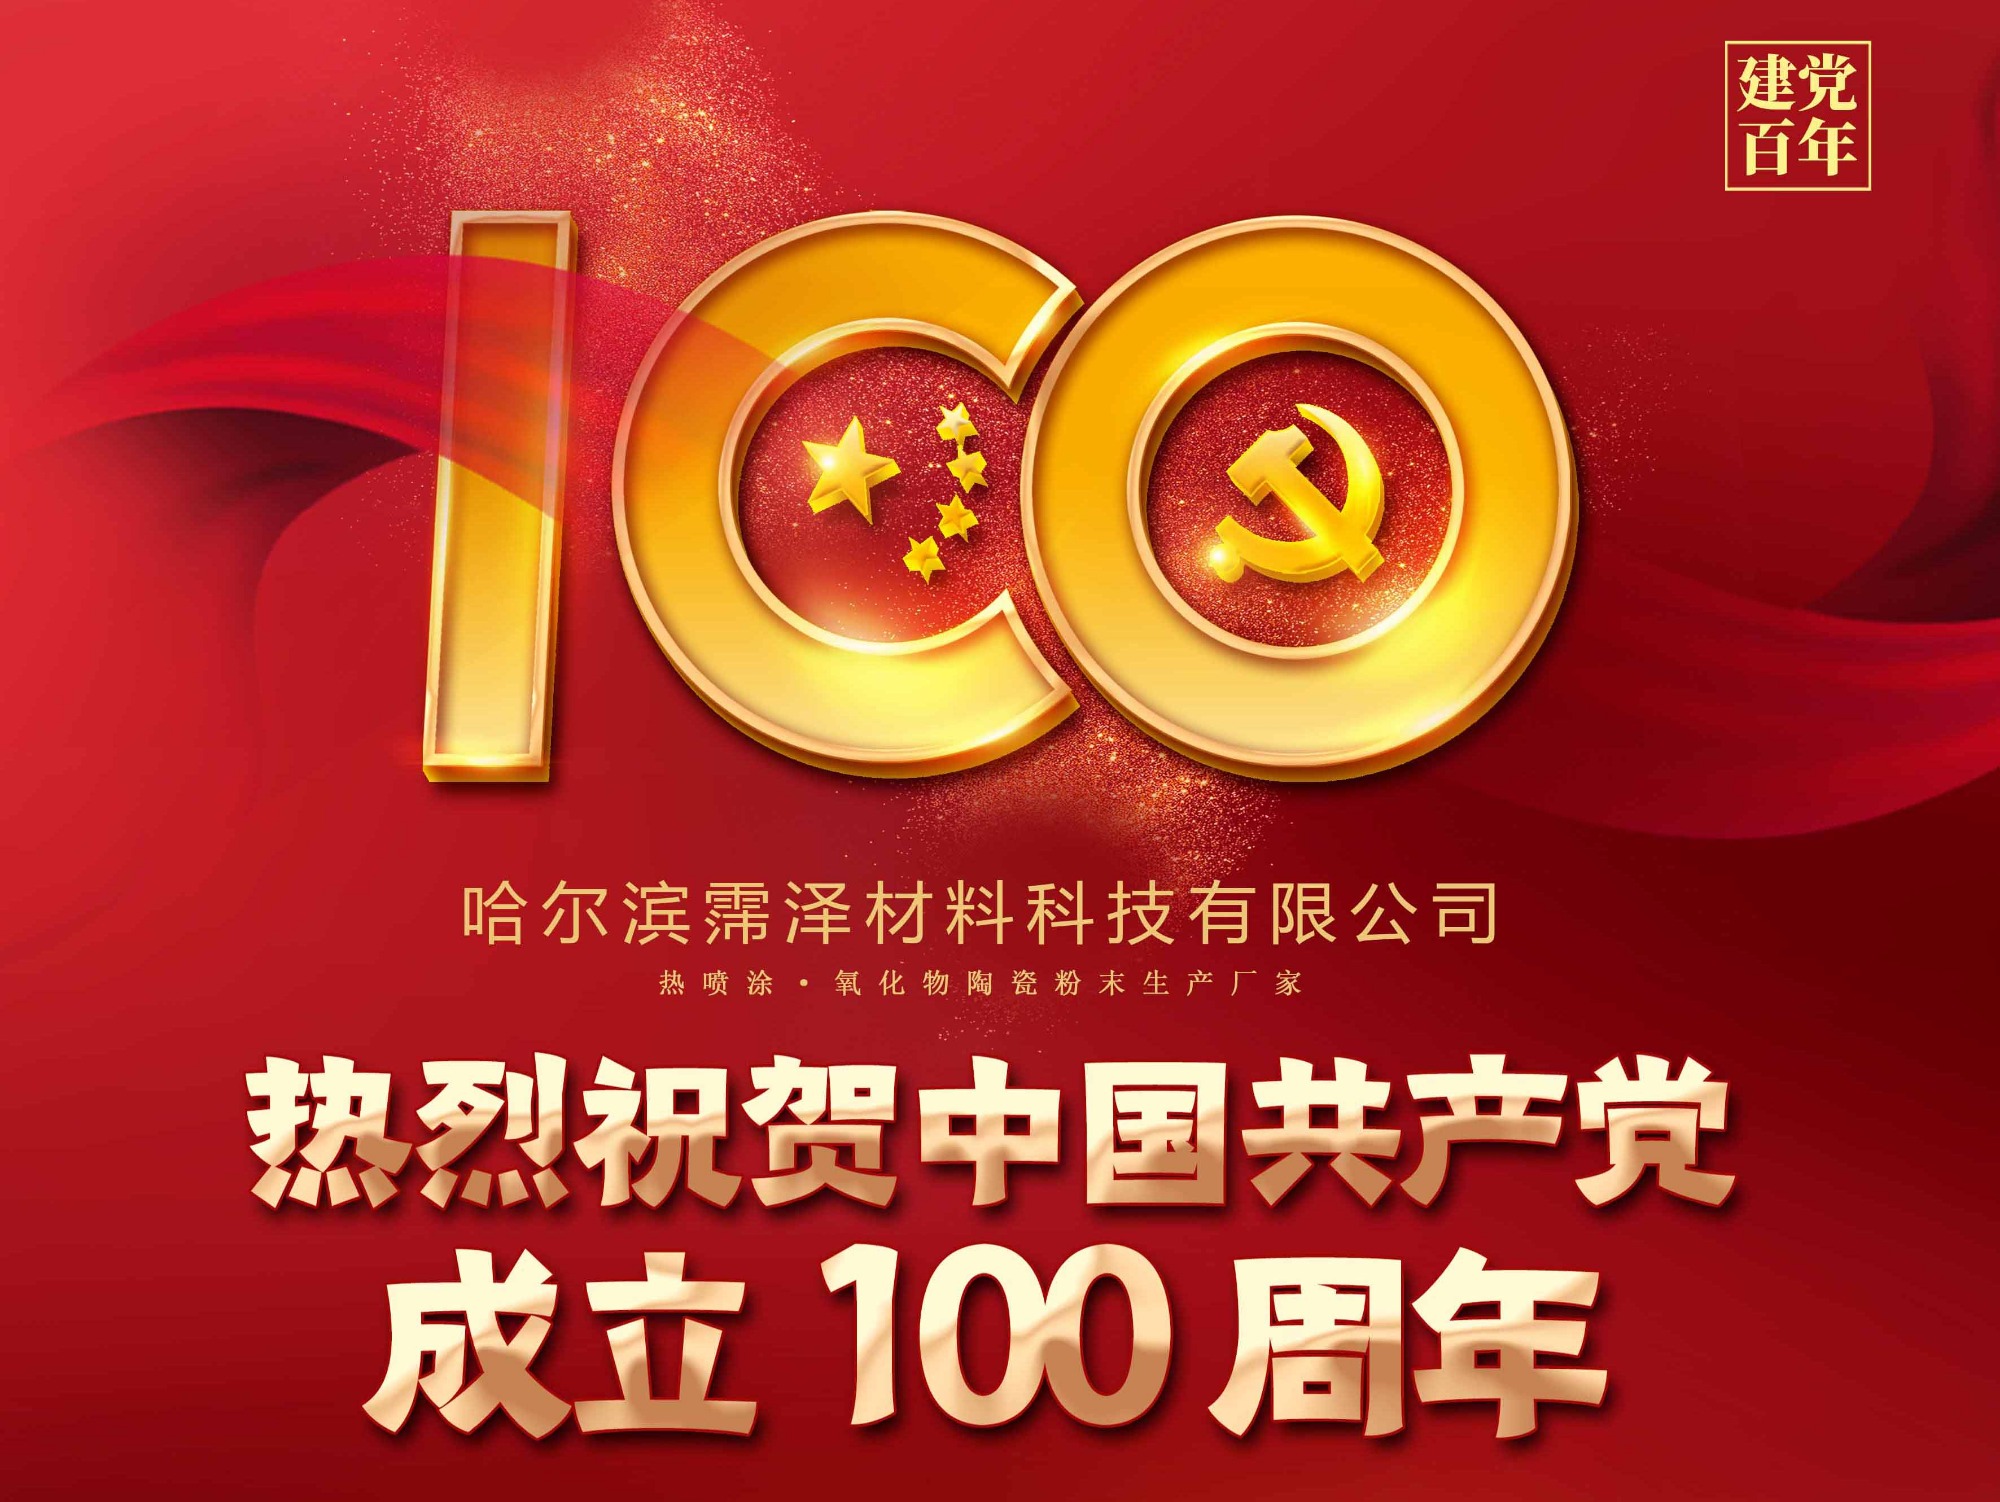 Congratulations to the 100th anniversary of the founding of the Communist Party of China